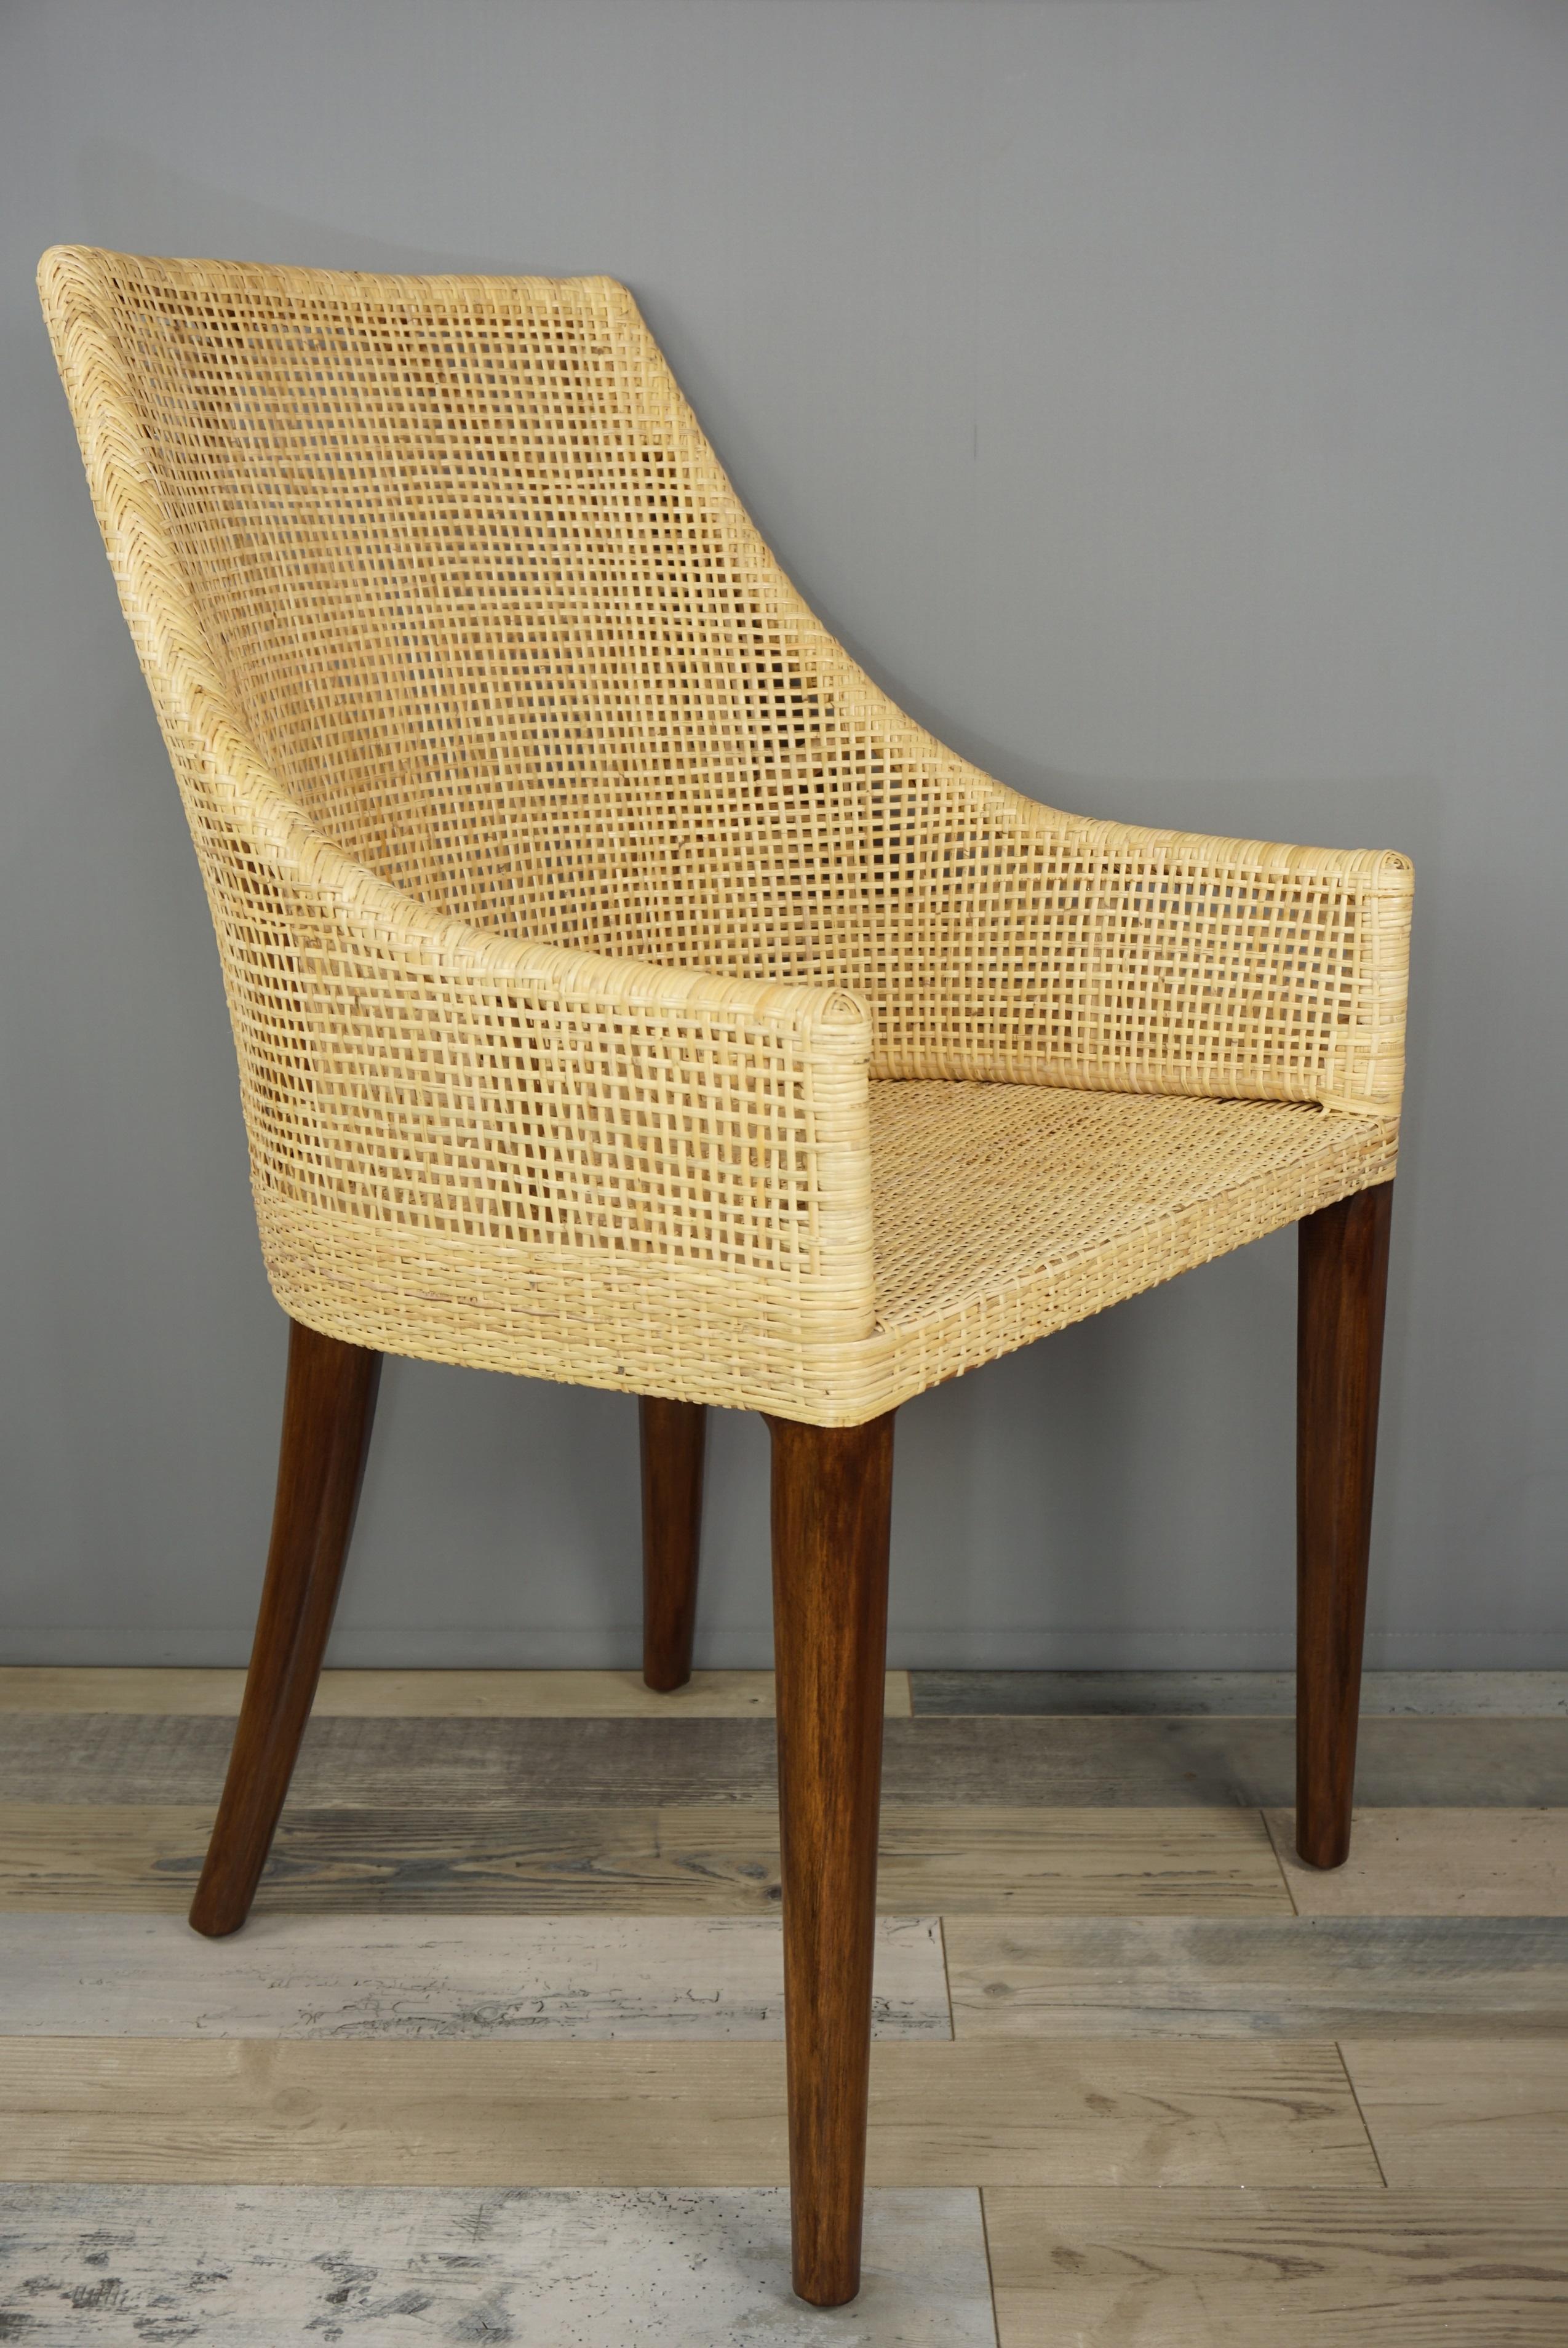 Elegant chair with a dark veneer solid wood structure and a braided rattan wicker cane seat shell, combining quality, robustness and class. Perfect on your terrace, in your veranda, your winter garden, around the dining table and even in your